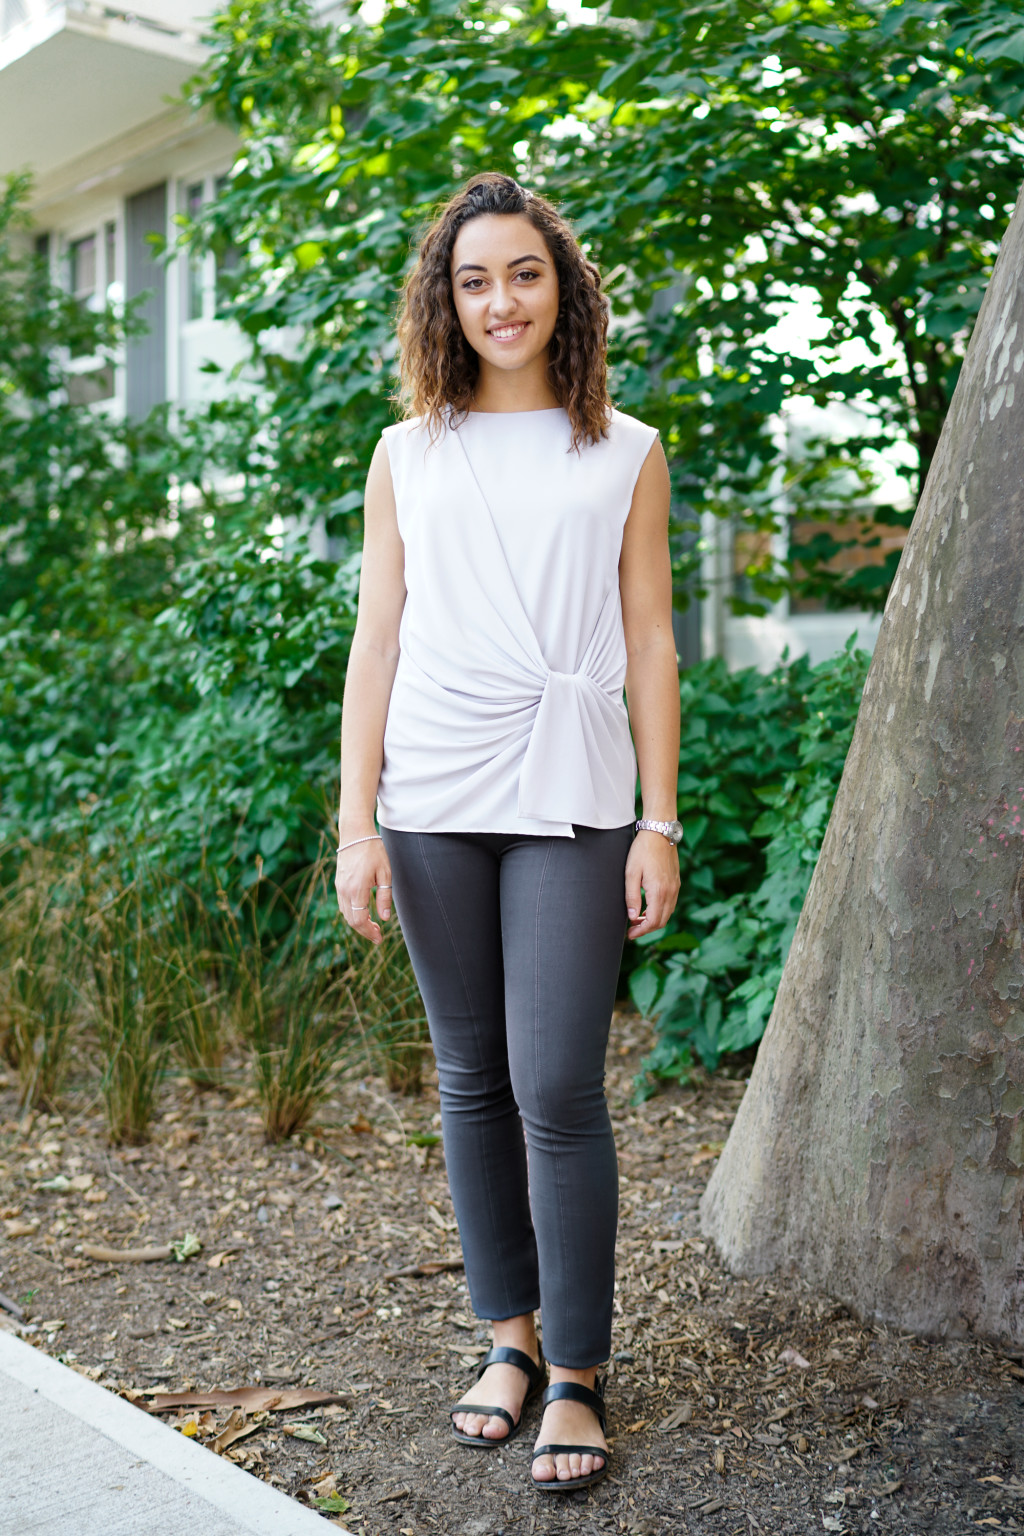 Elle wears the Foster pant in monsoon, the Bronte top in mist, and the Tennis bracelet